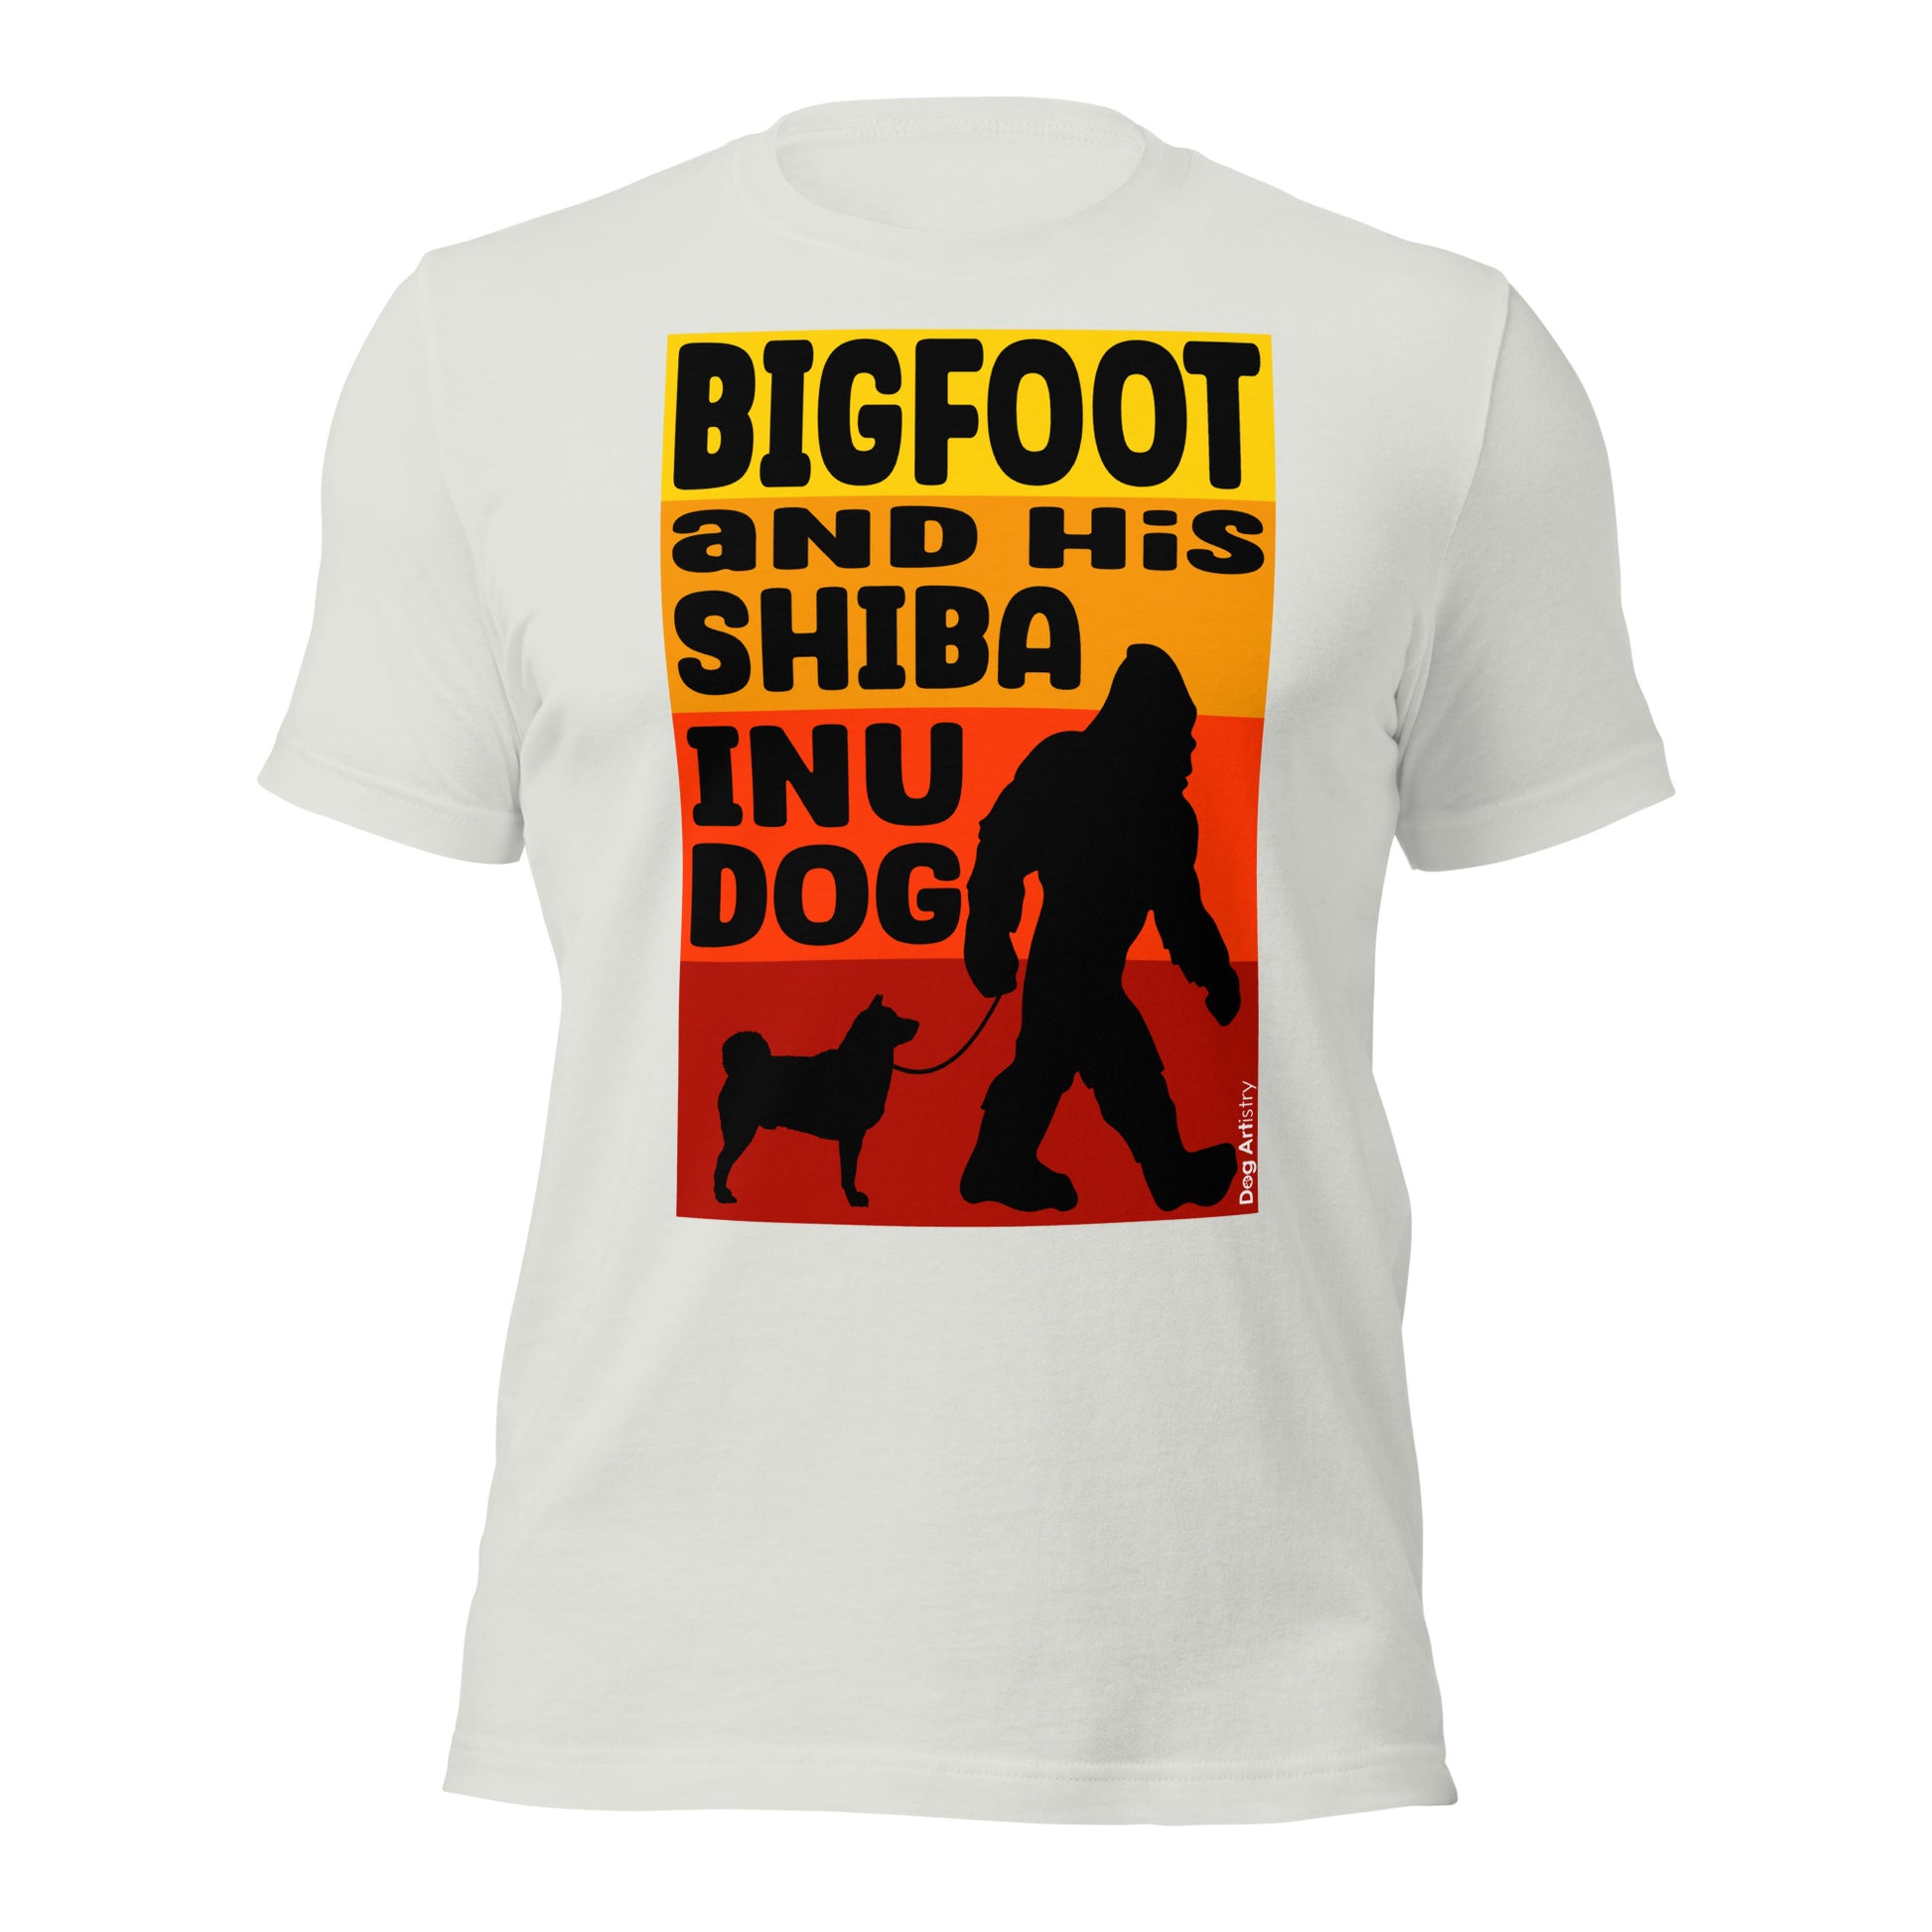 Bigfoot and his Shiba Inu dog unisex silver t-shirt by Dog Artistry.